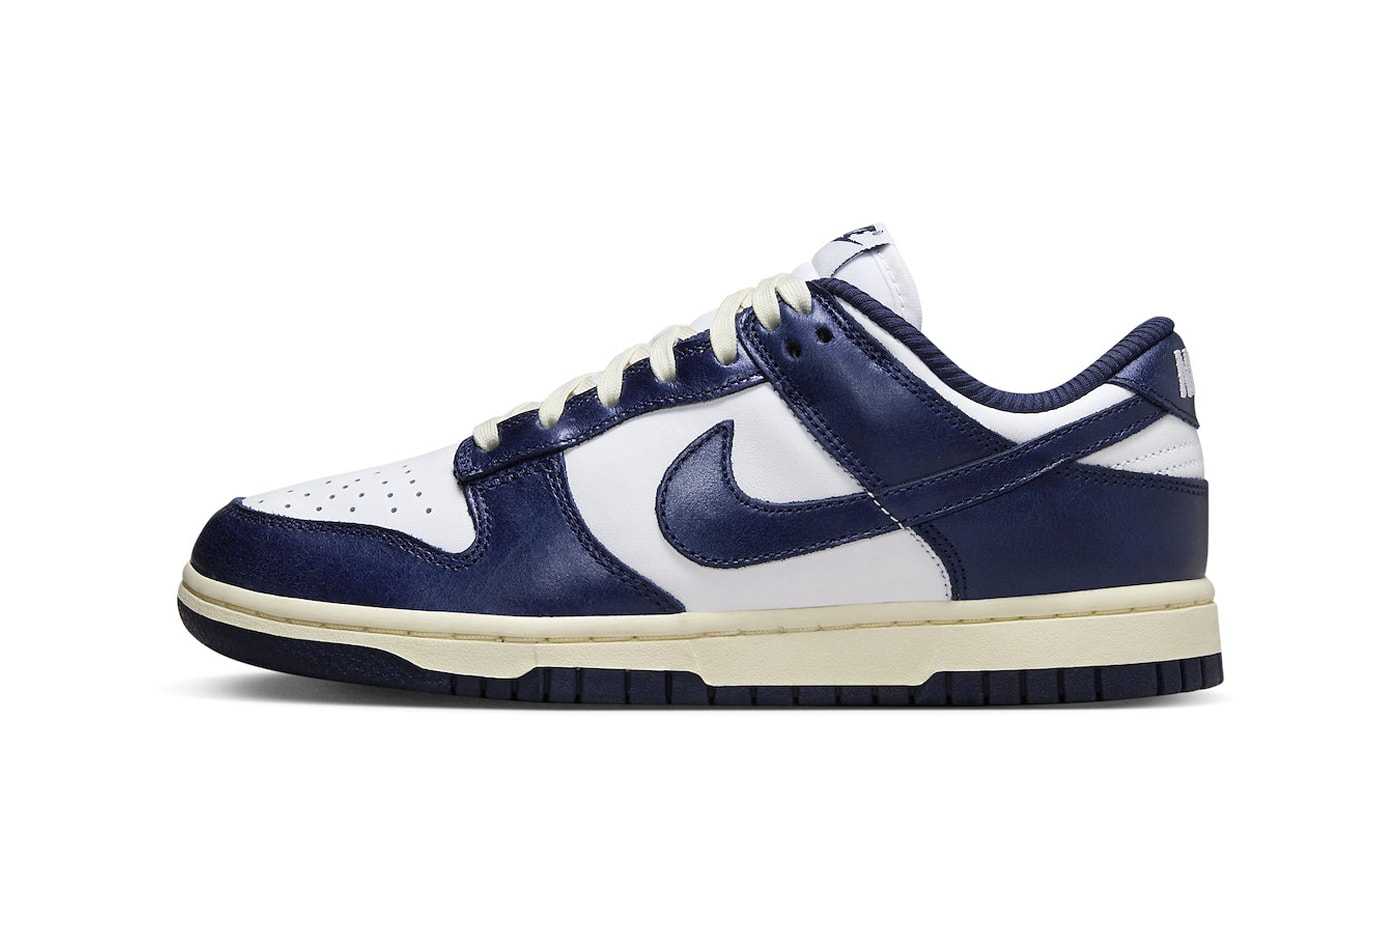 Nike Dunk Low Surfaces in "Vintage Navy" FN7197-100 White/Midnight Navy-Coconut Milk swoosh low-top typical everyday shoes